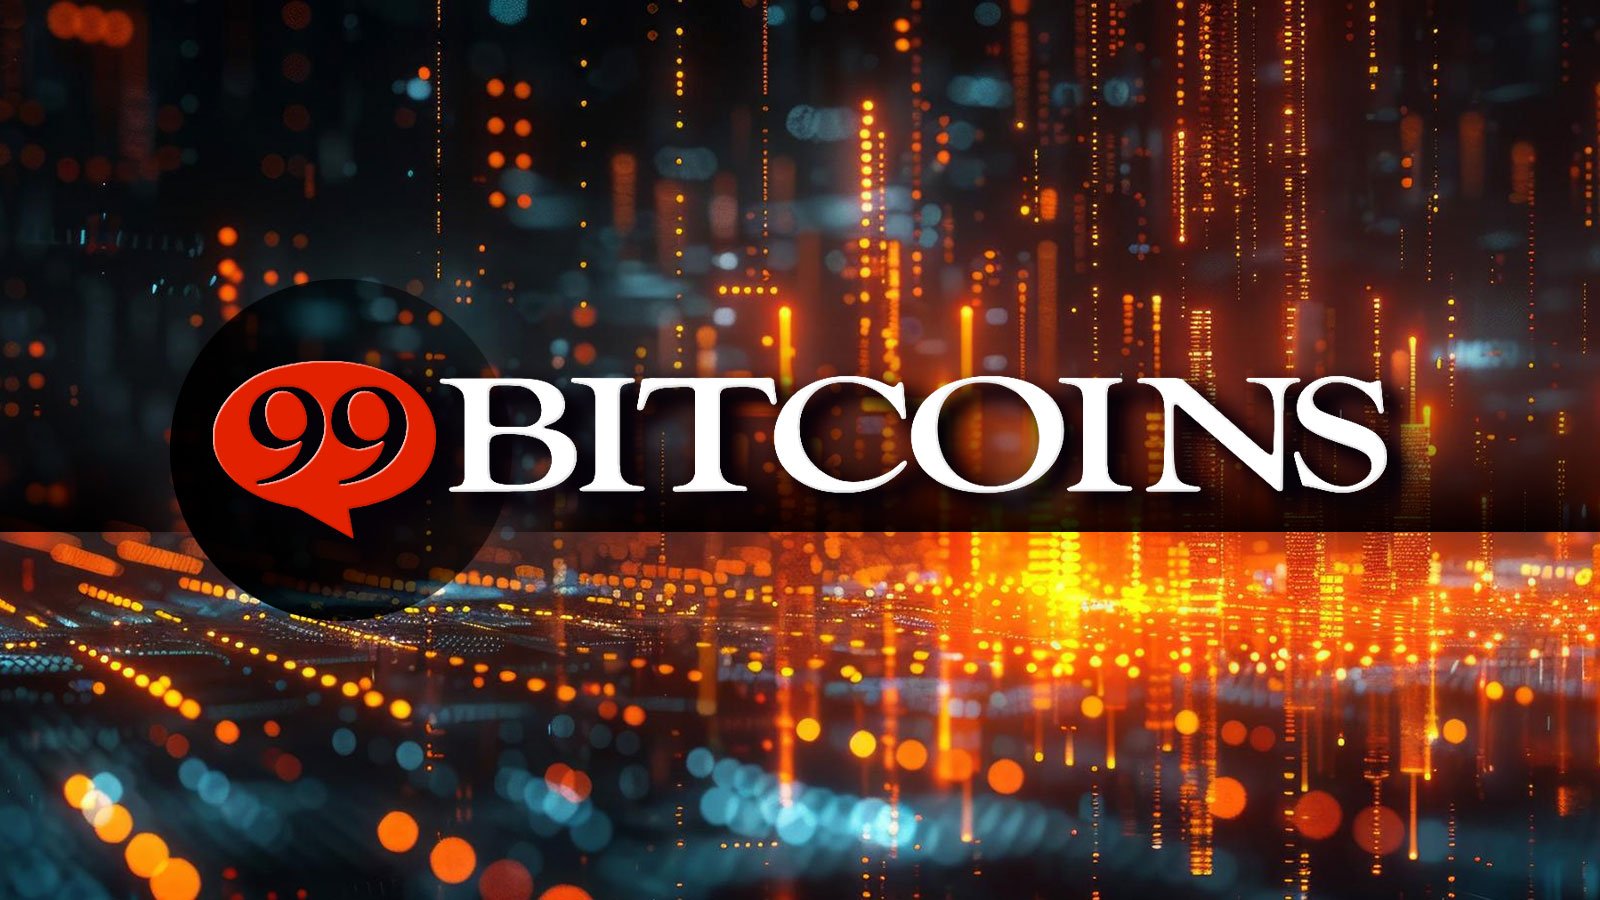 99Bitcoins Launches Presale – Learn-to-Earn Platform Raises $100,000 in a  Flash | U.Today